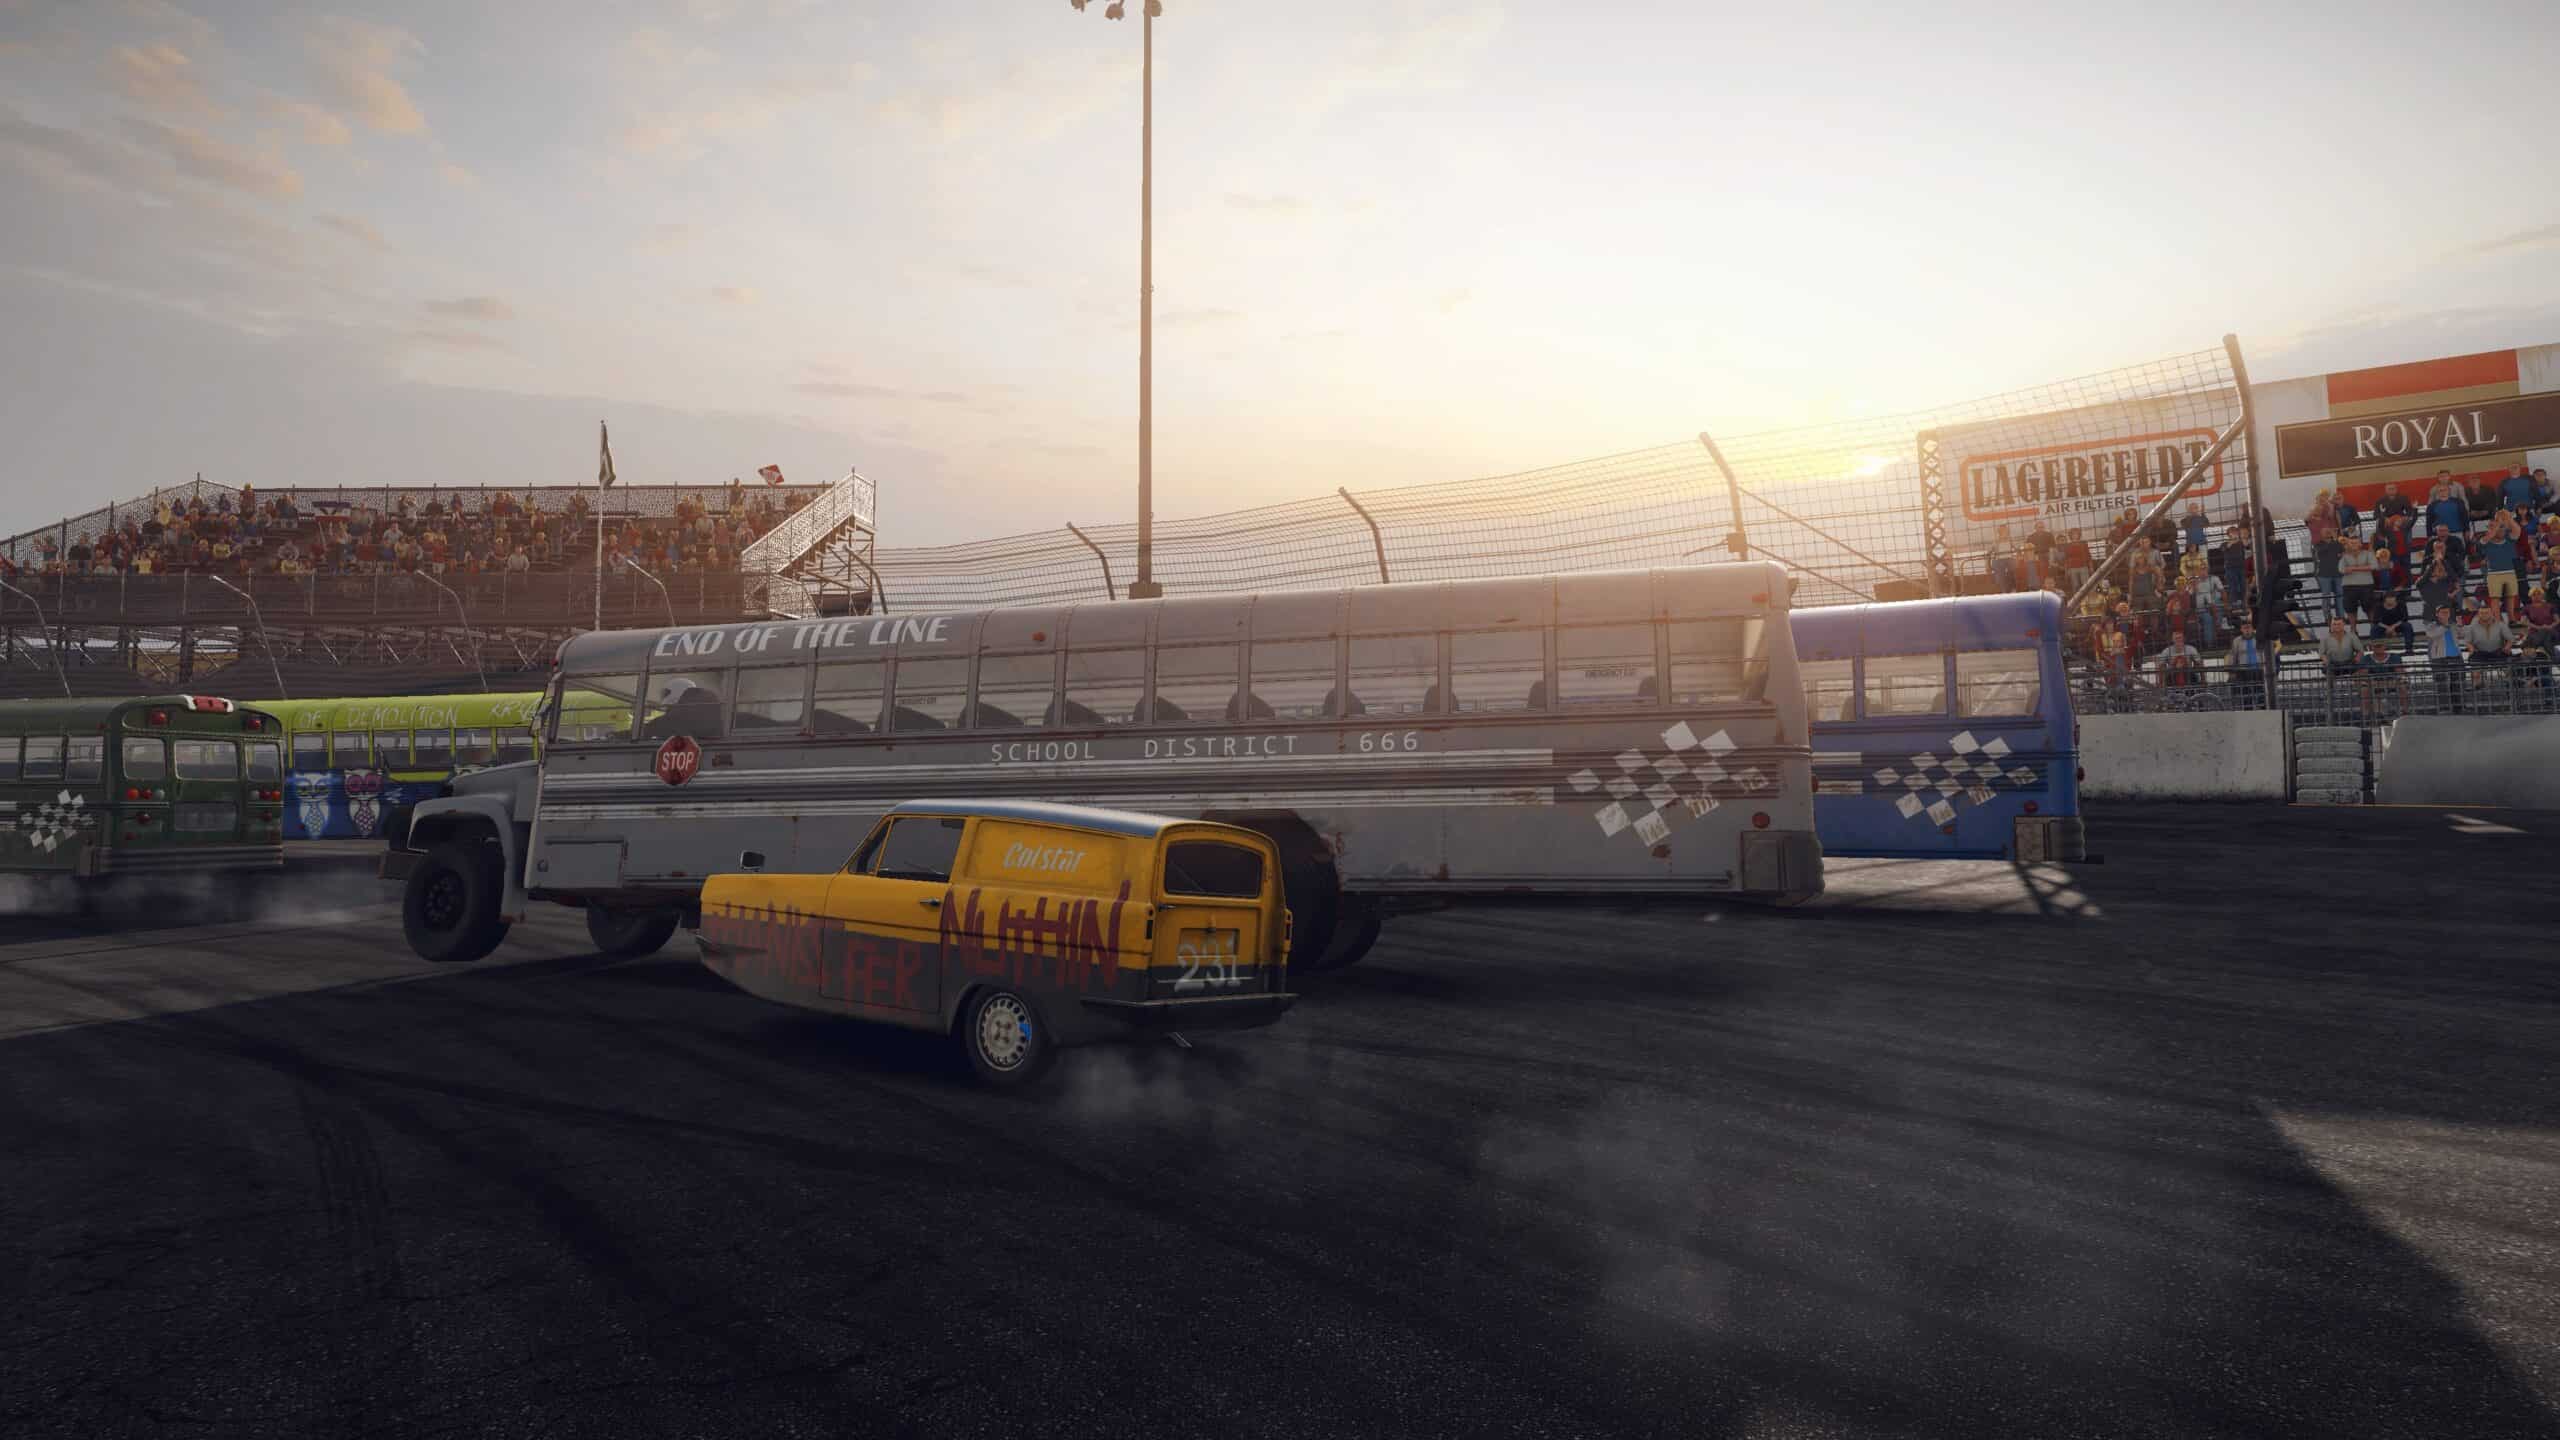 Wreckfest adds PlayStation save transfer, cross-gen multiplayer and new PC visuals